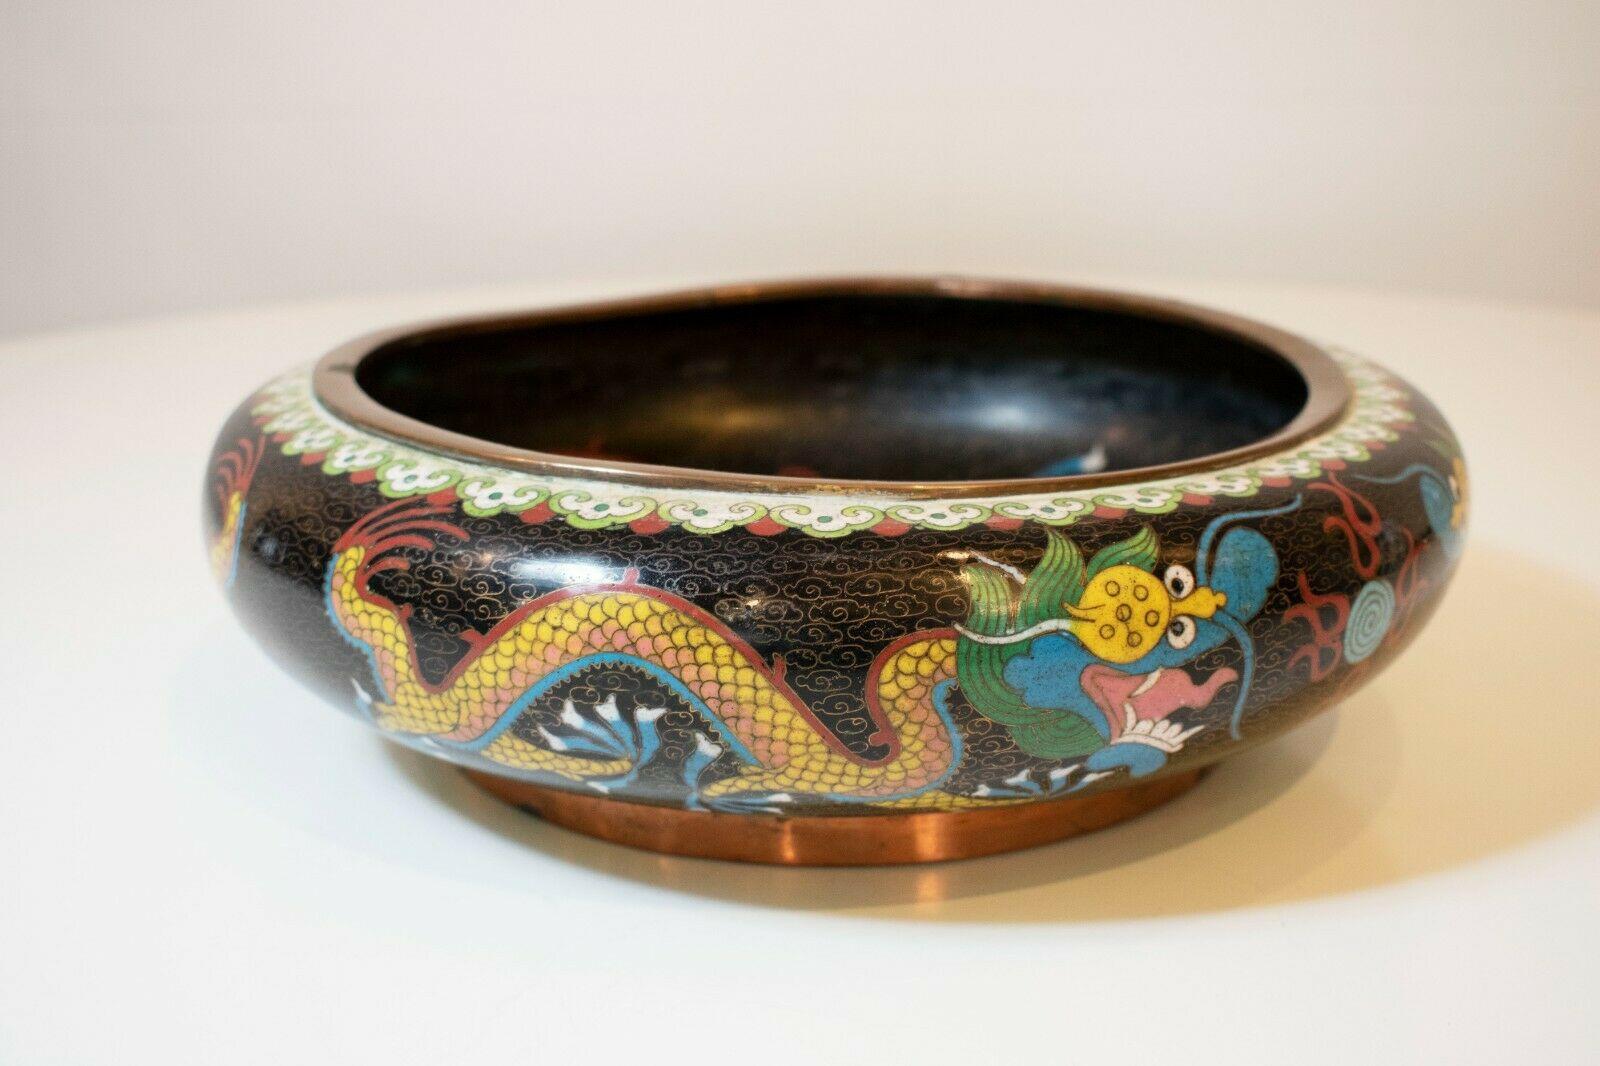 A charming Vintage Chinese cloisonné bowl.

This intricately designed bowl was made using traditional methods, and boasts beautiful detailing of the eponymous Chinese dragon

Very good vintage condition, no chips or cracks in the enamel. 

Signed to